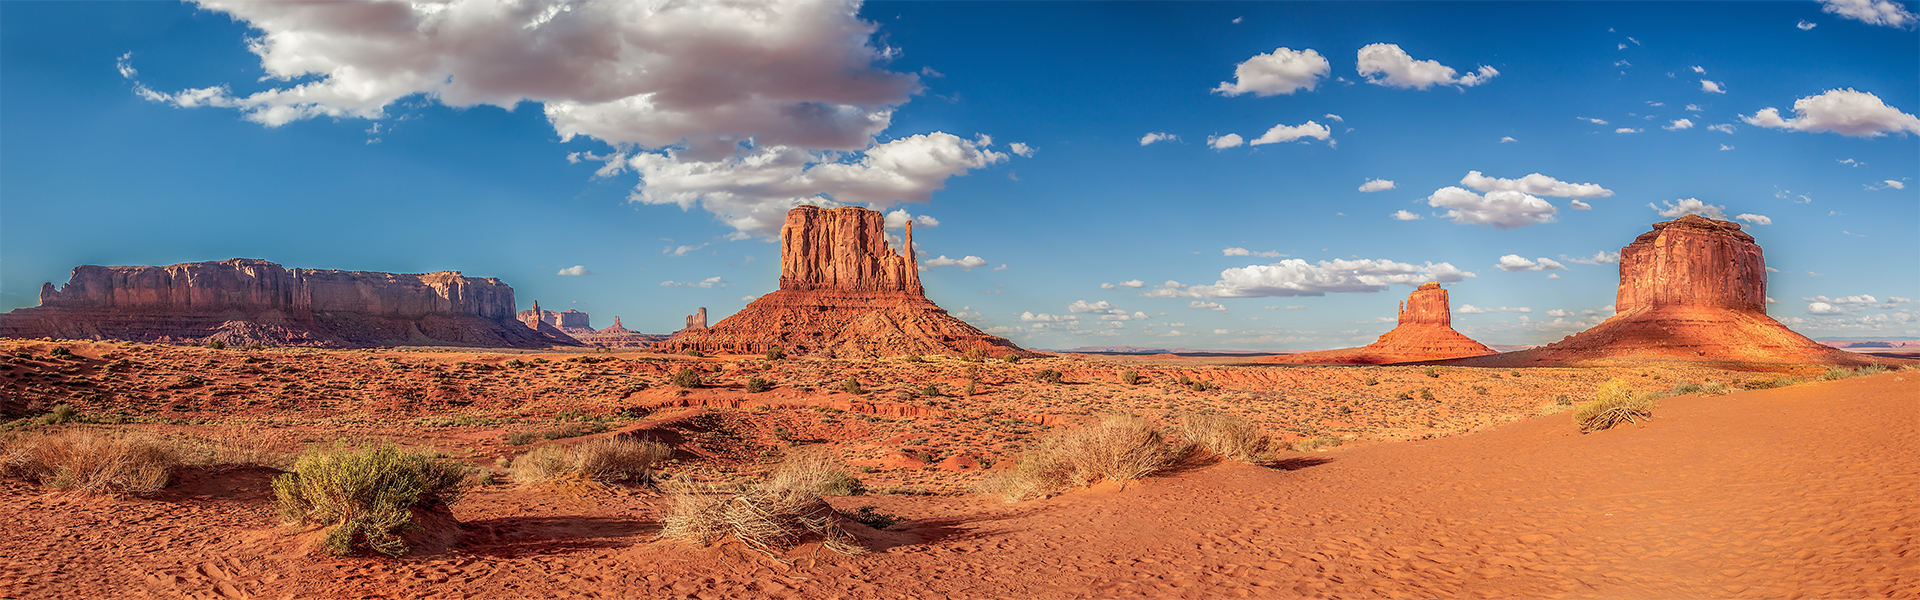 panoramic shot famous monument valley usa